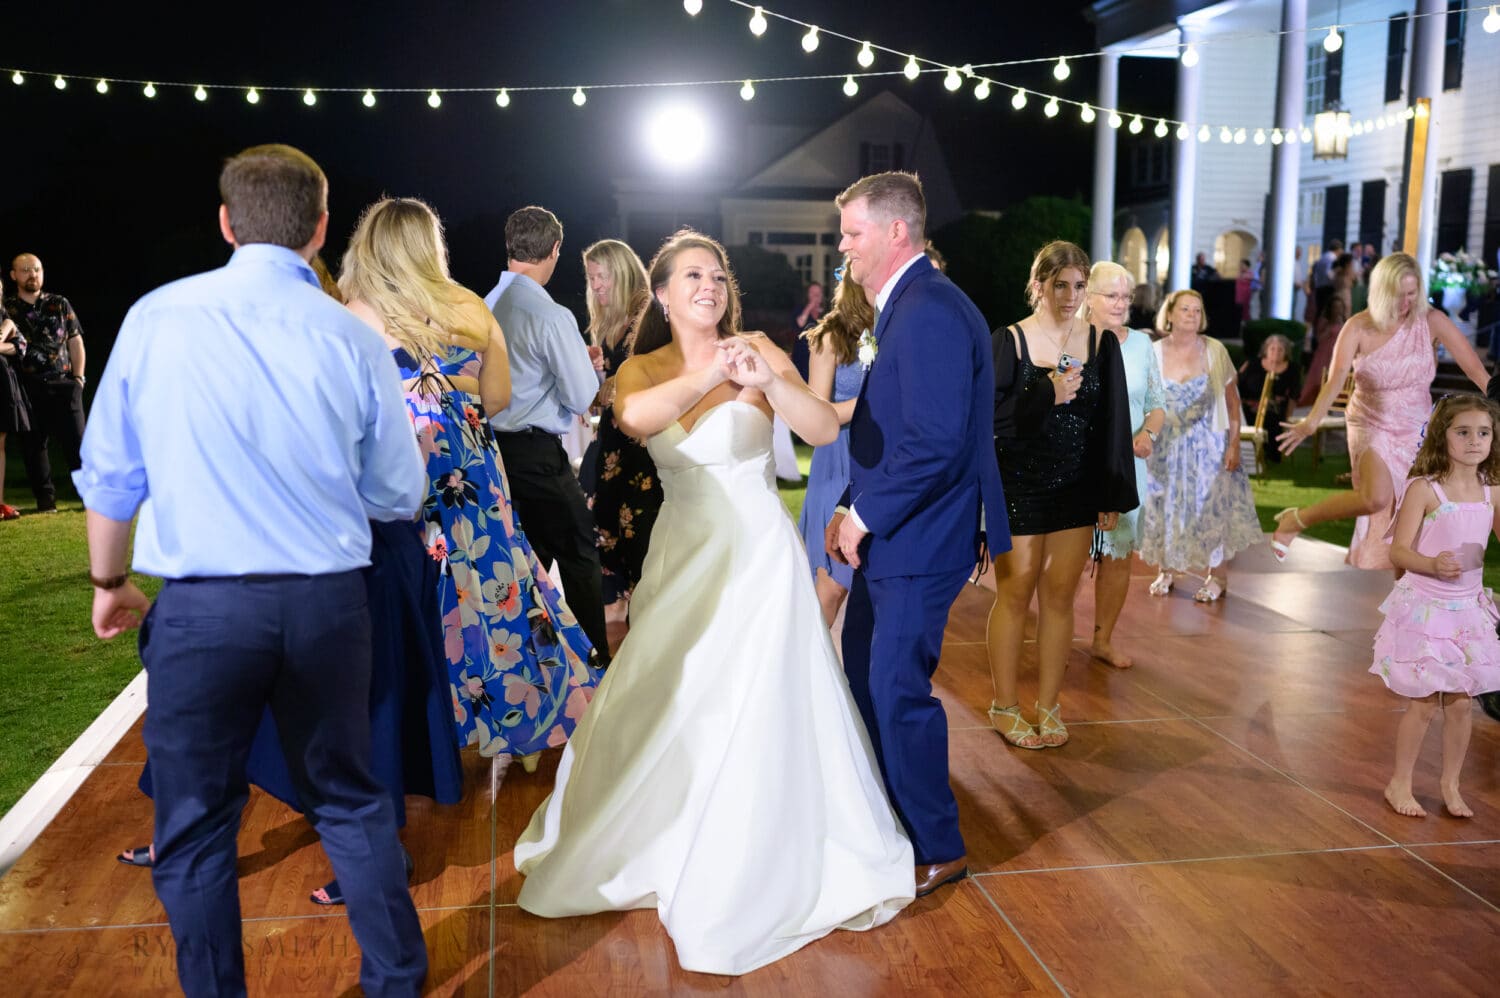 Dancing on the outdoor dance floor - Pine Lakes Country Club